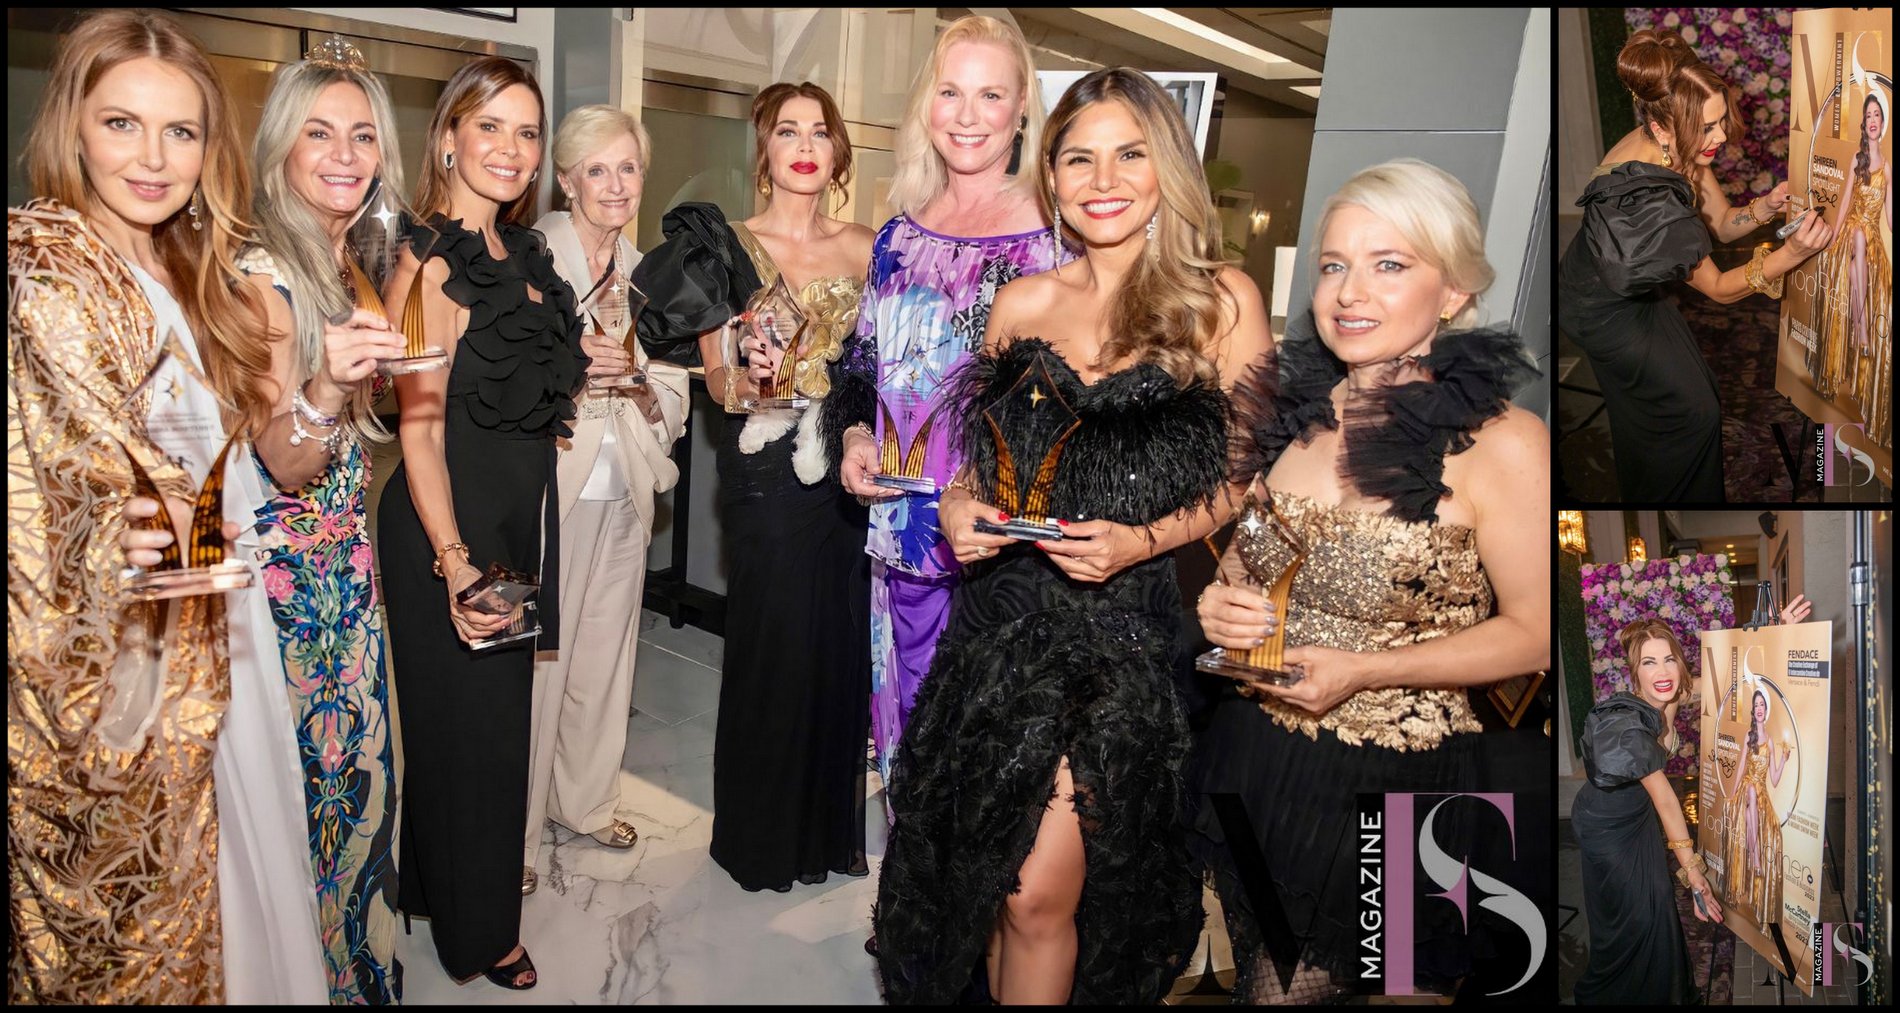 MFS Magazine Celebrates Its Women Empowerment Issue Awarding Cover Star Shireen Sandoval and Top Real Women in Fashion & Business 2022-23 with WE Awards